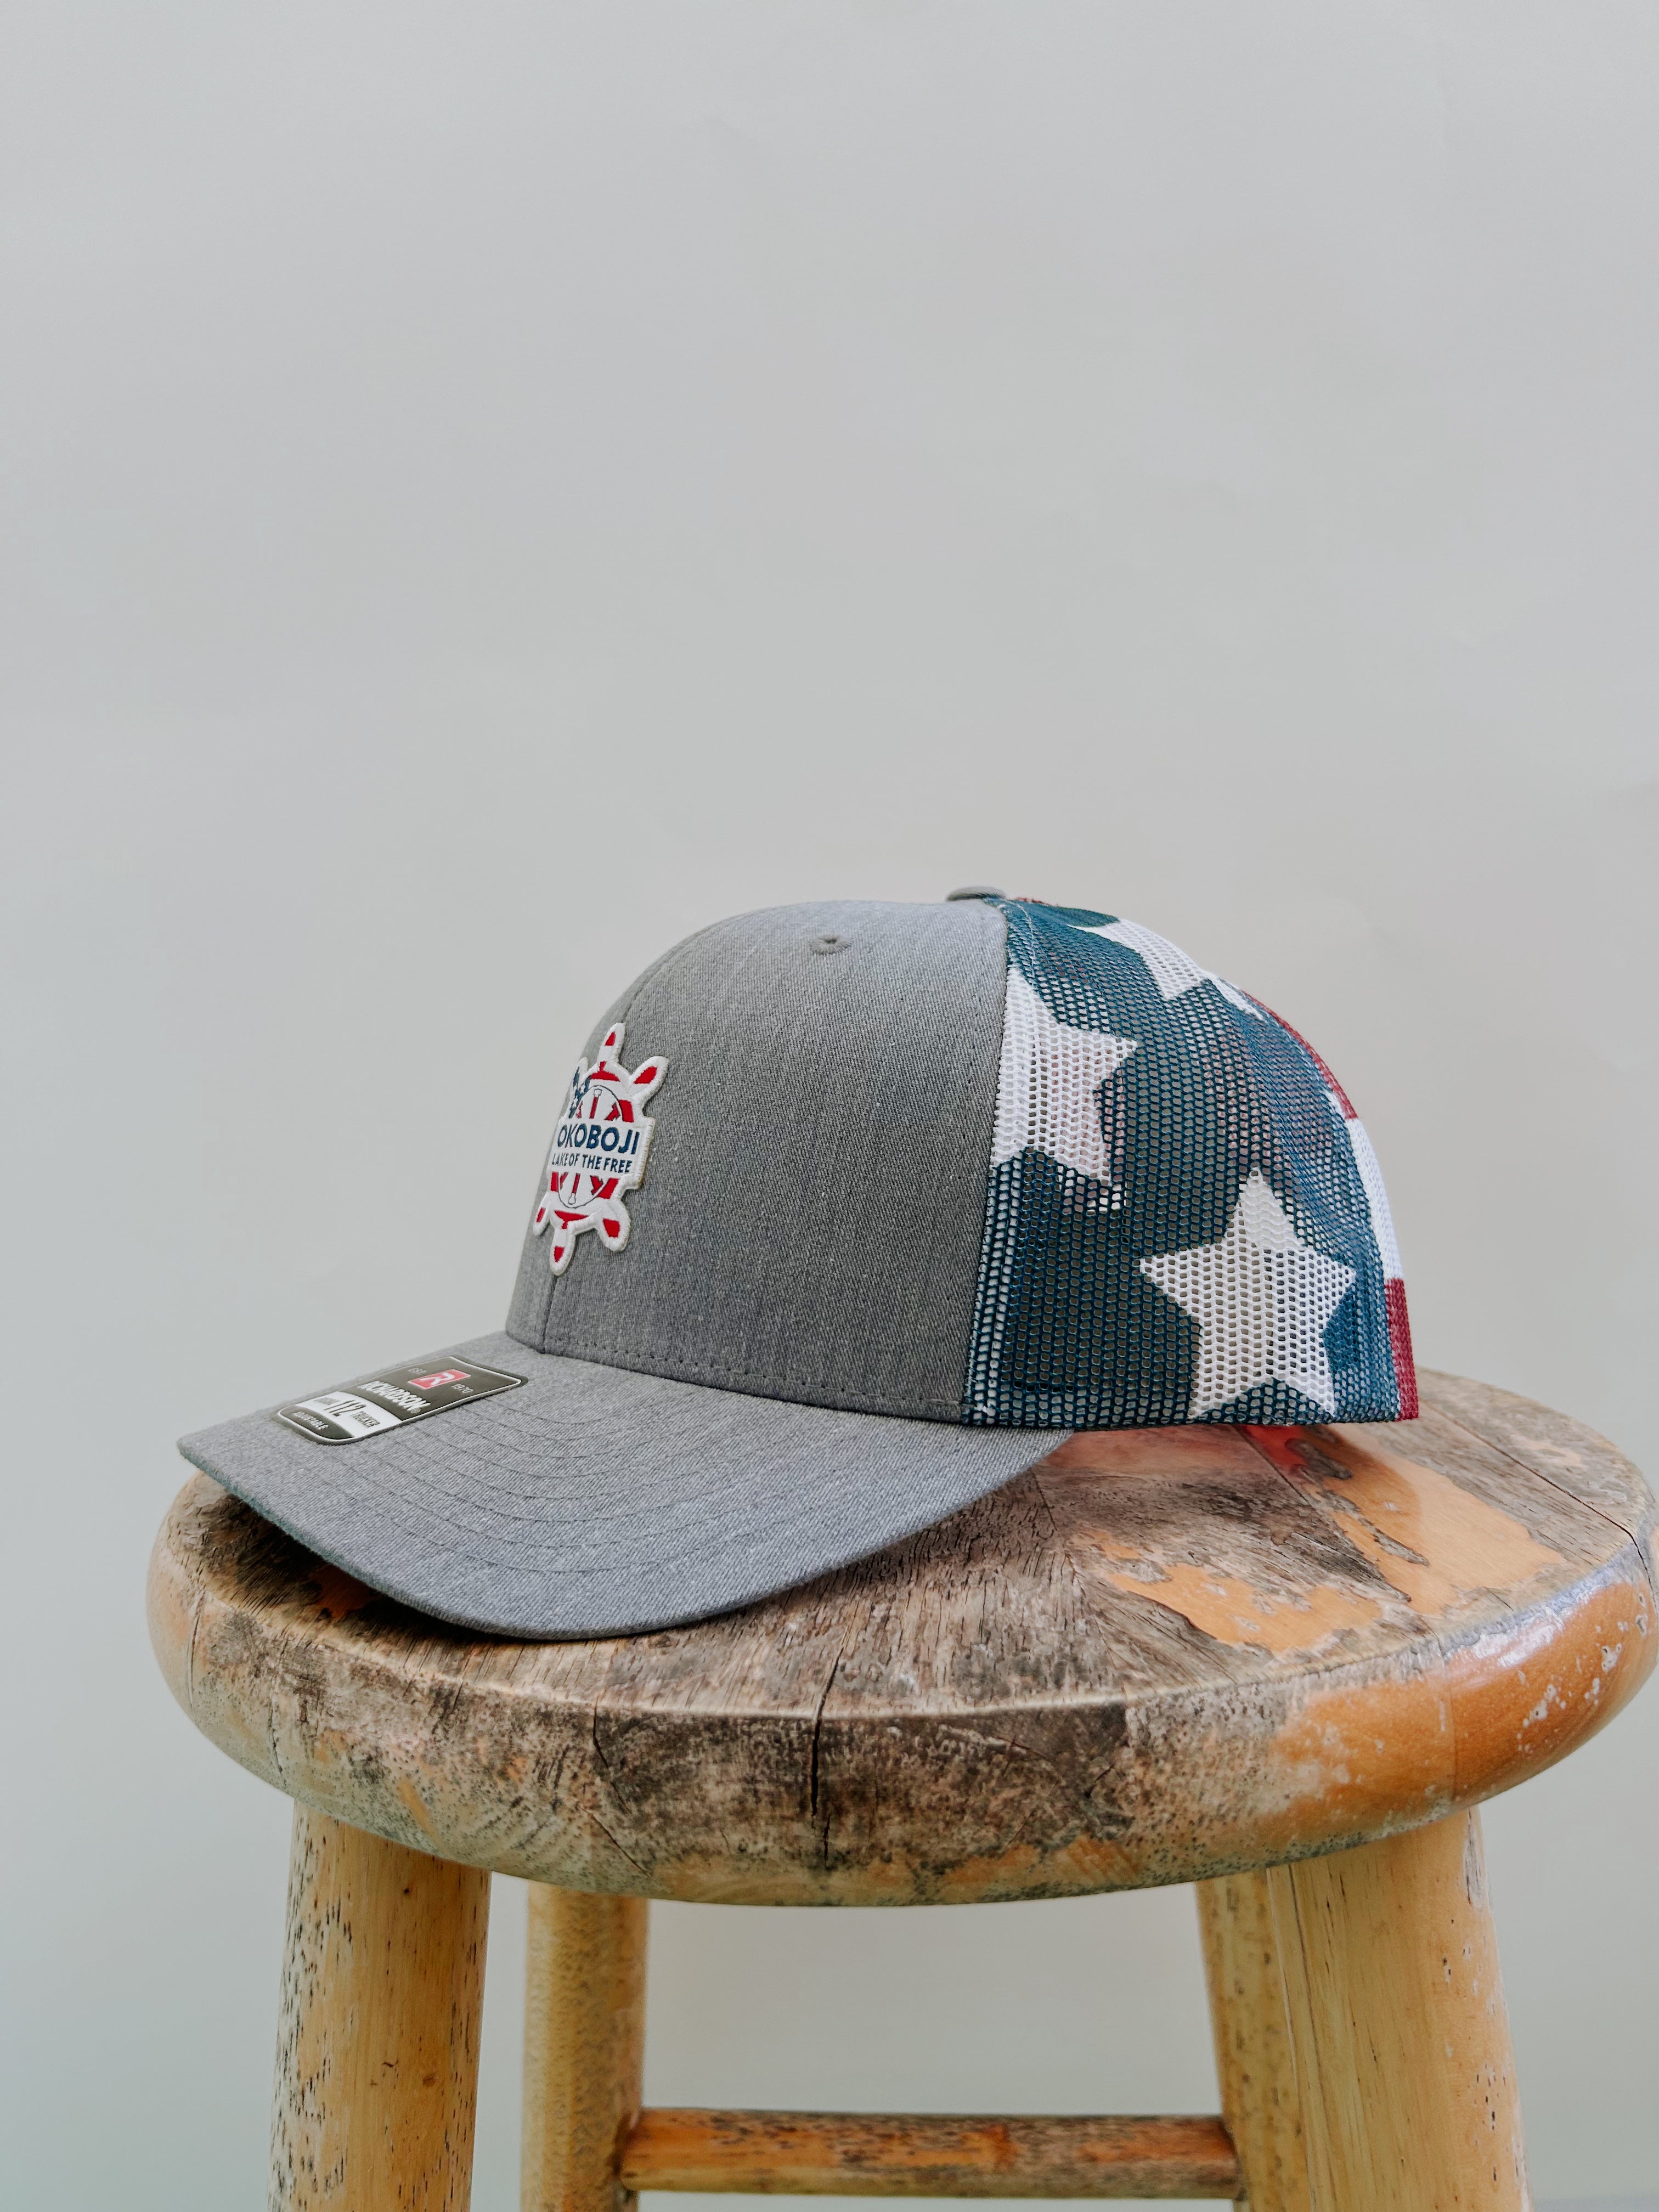 OBW- LAKE OF THE FREE HAT